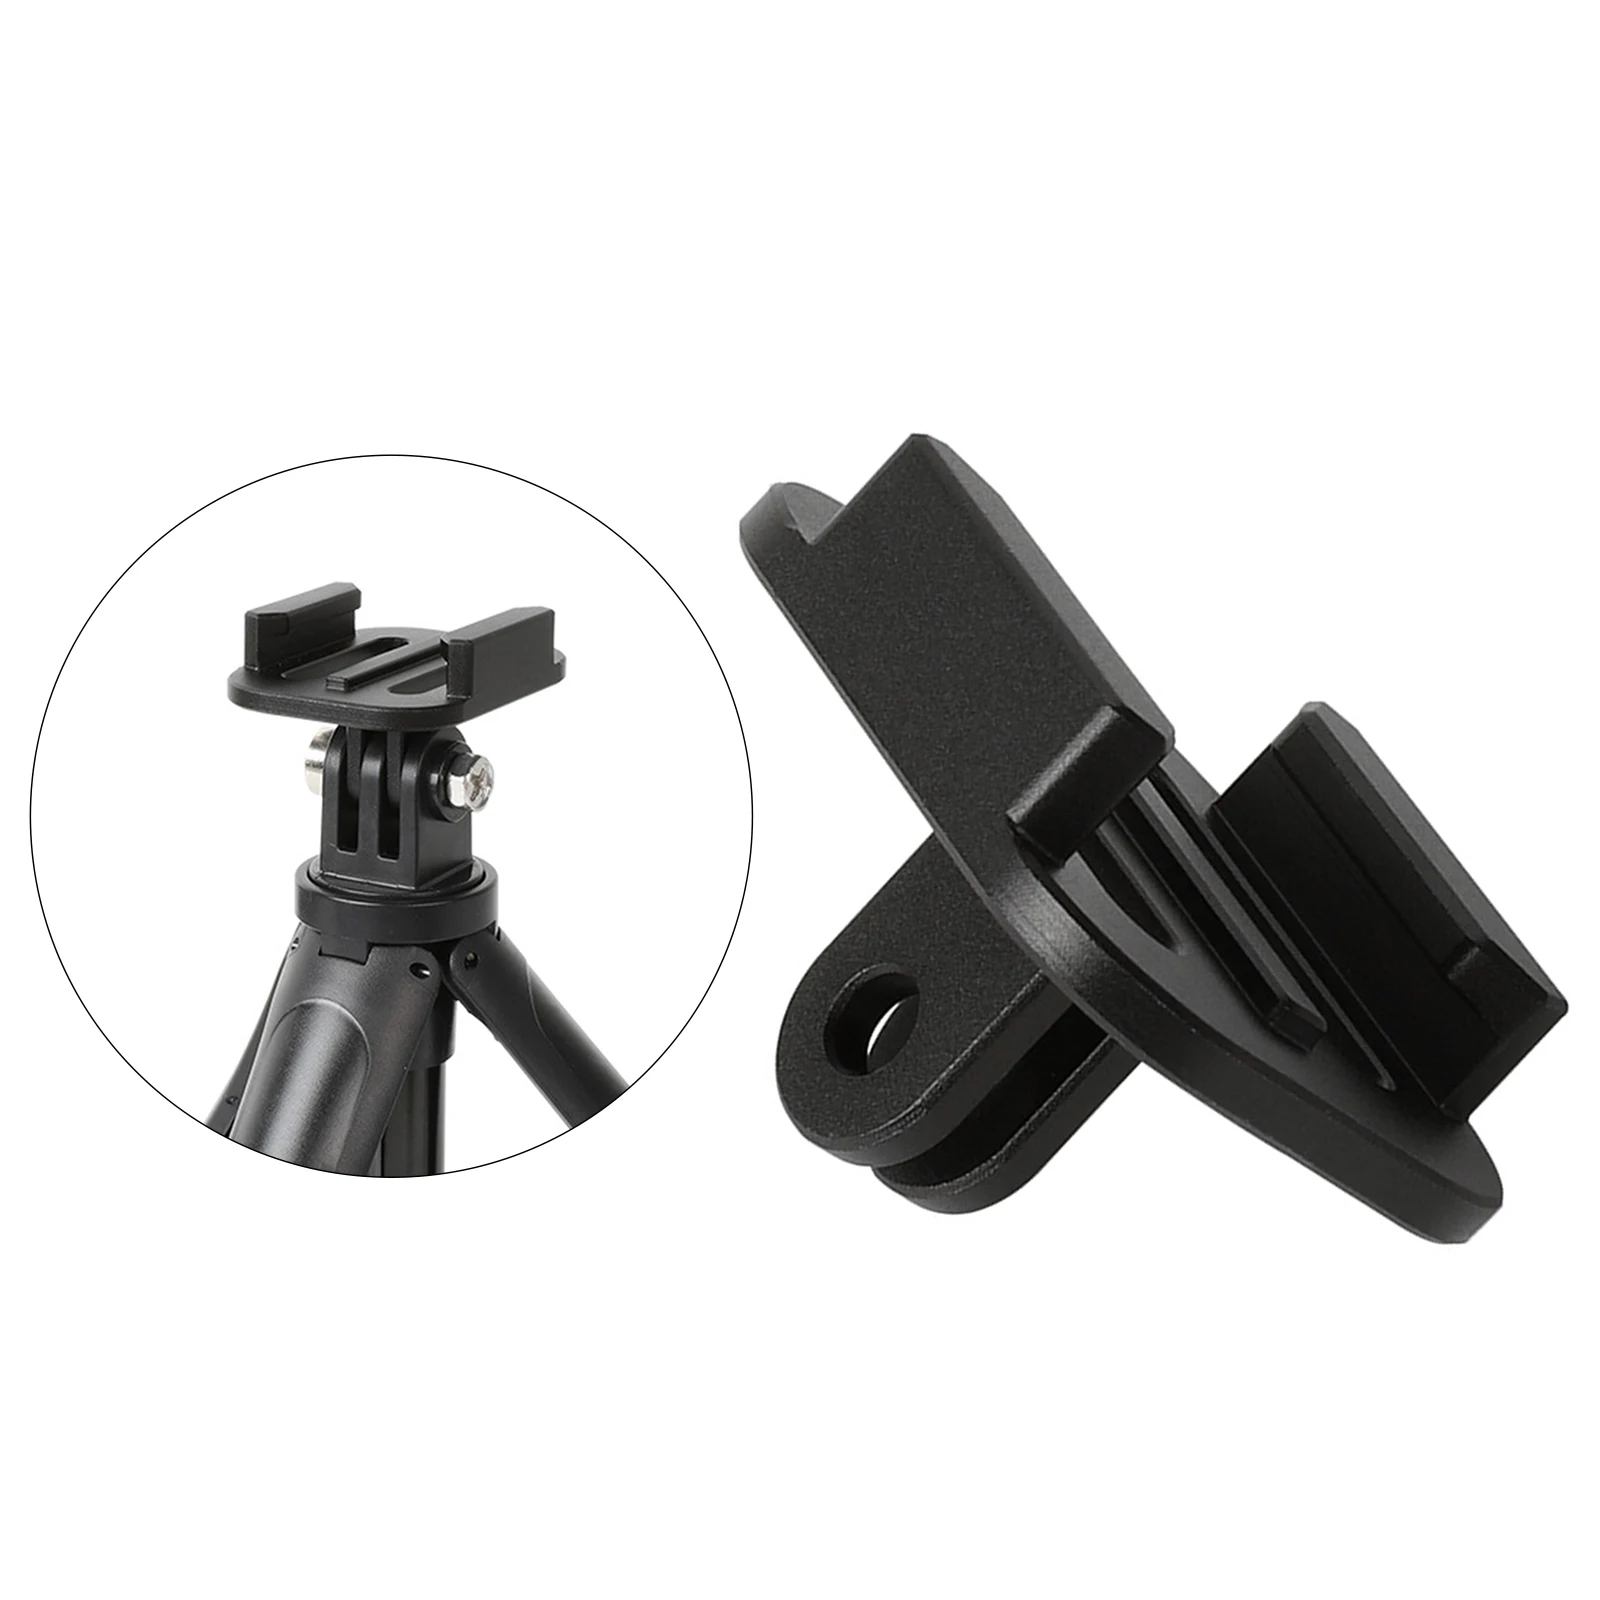 Aluminum Alloy, Camera Release Mount Base Adapter, for Action Cameras Accessories 1 Piece